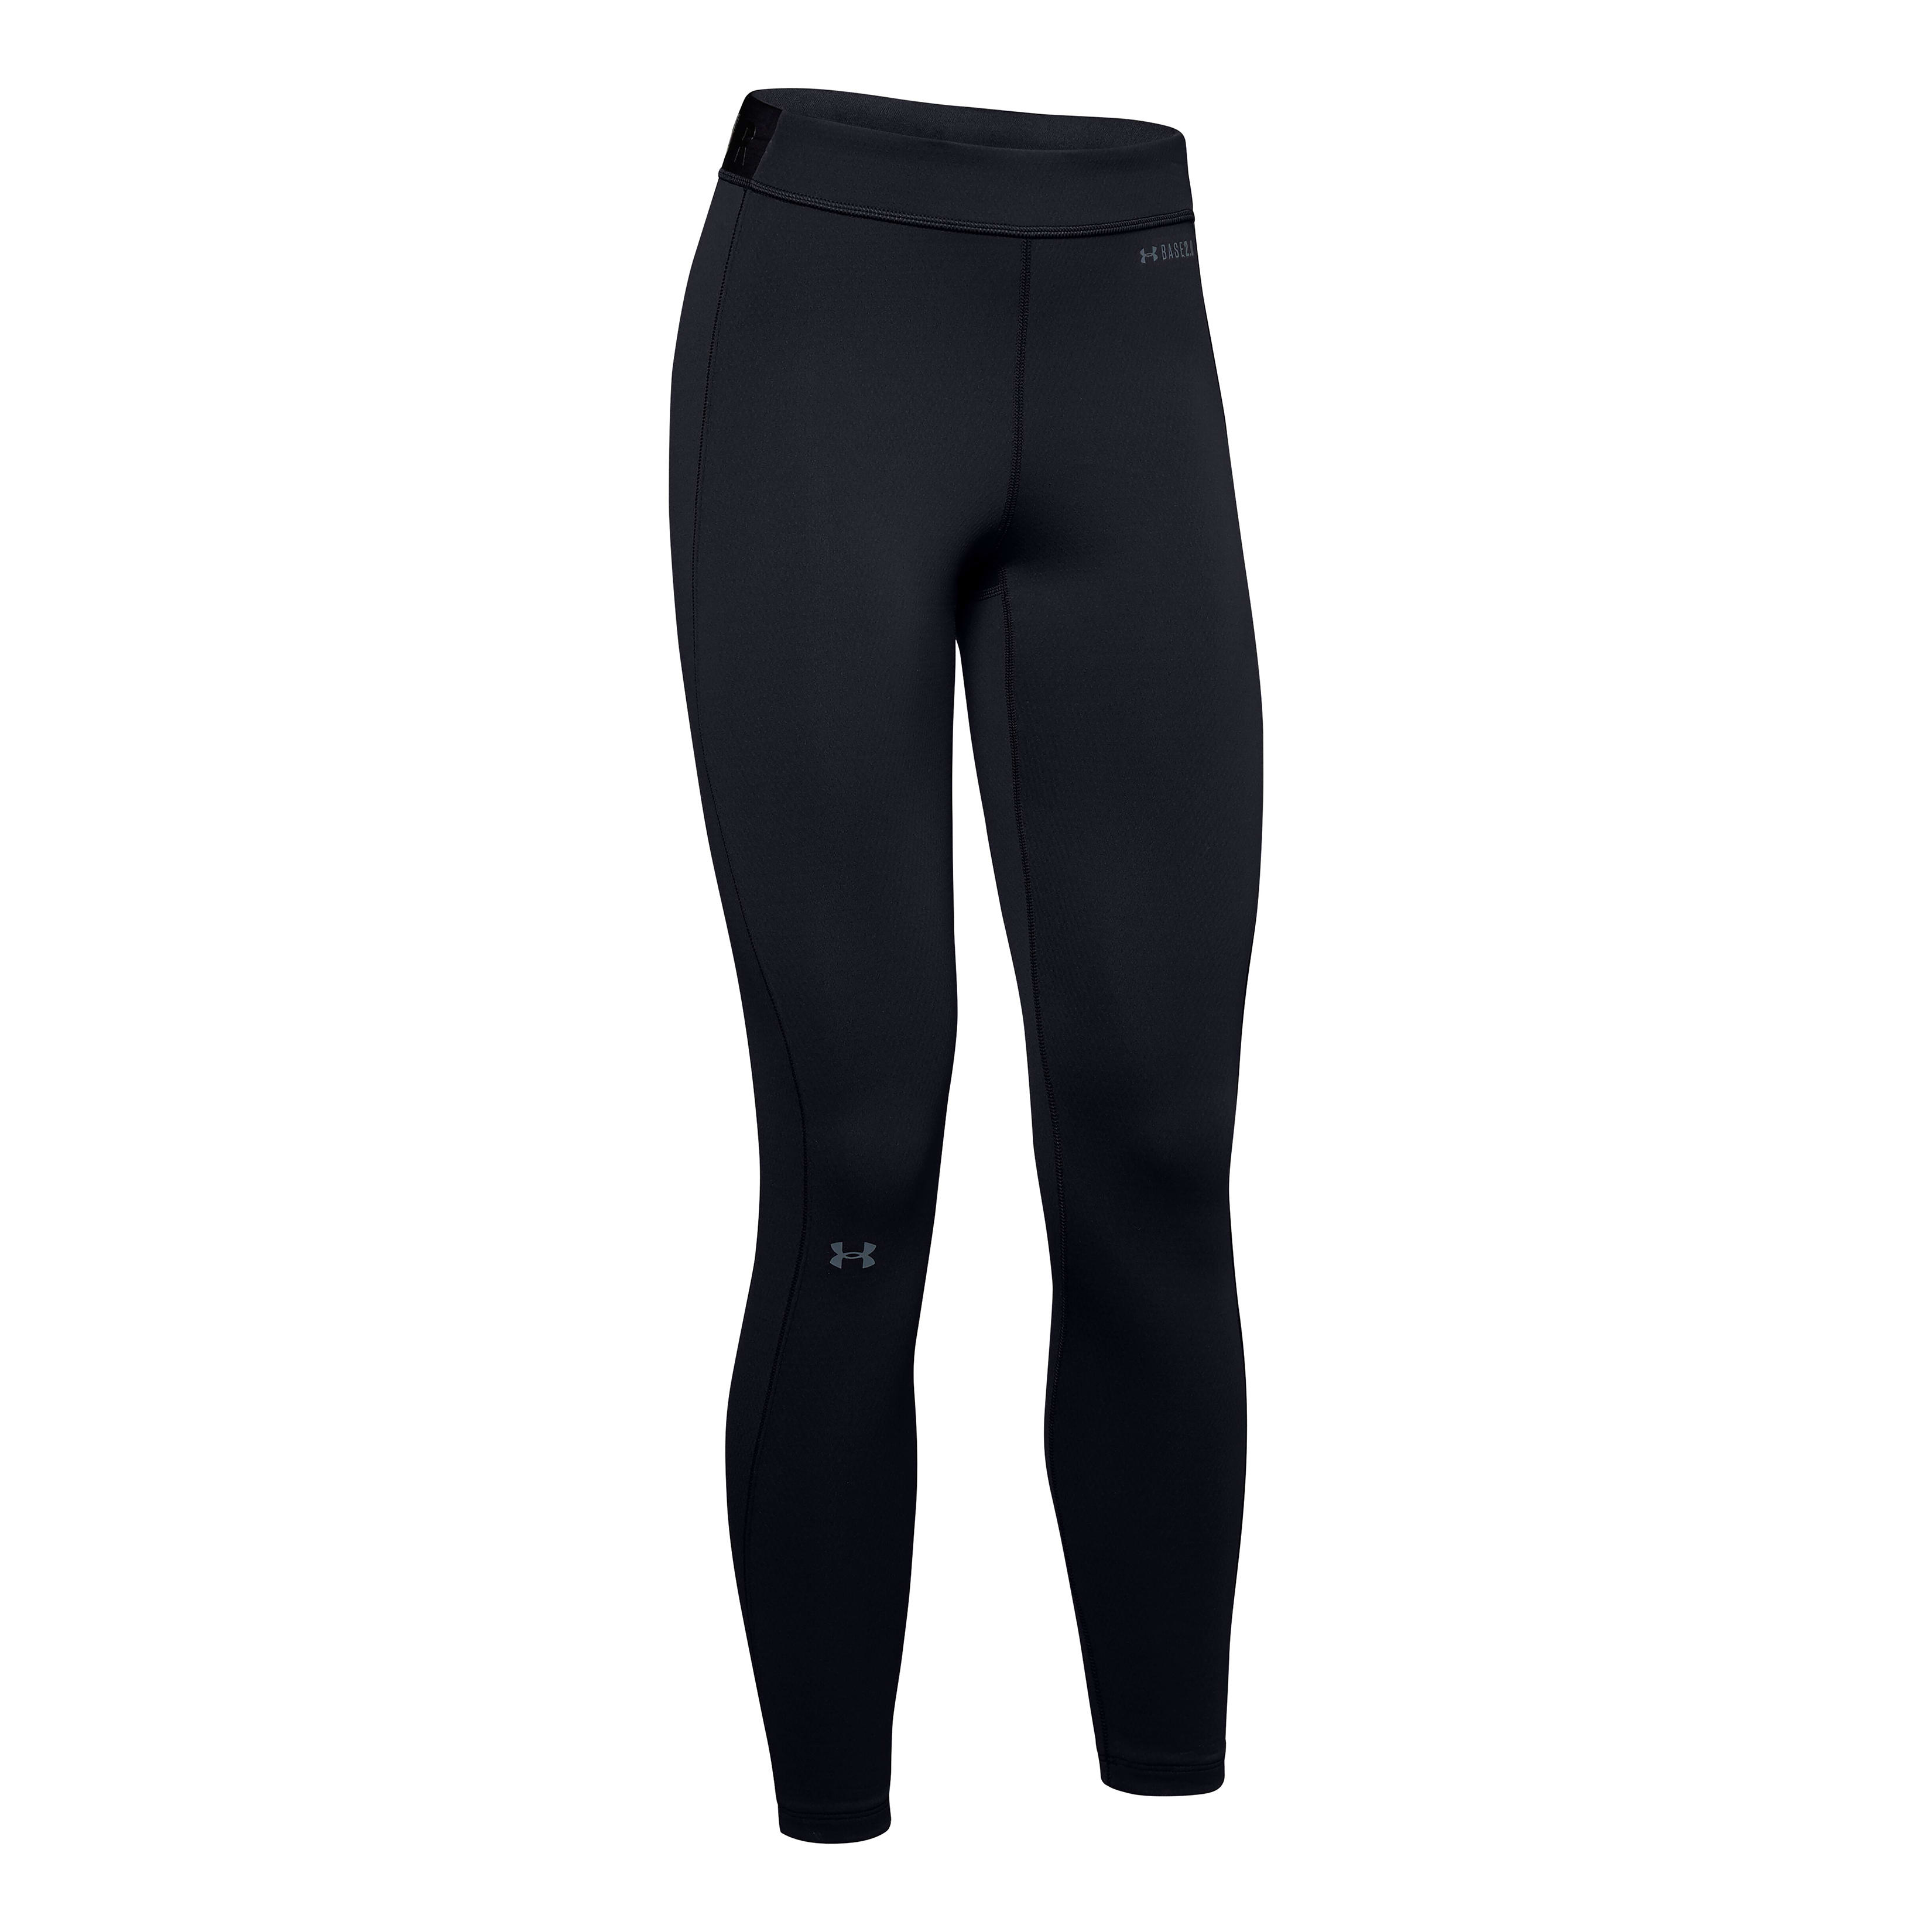  Under Armour Women's Pure Stretch Hipster,Icelandic